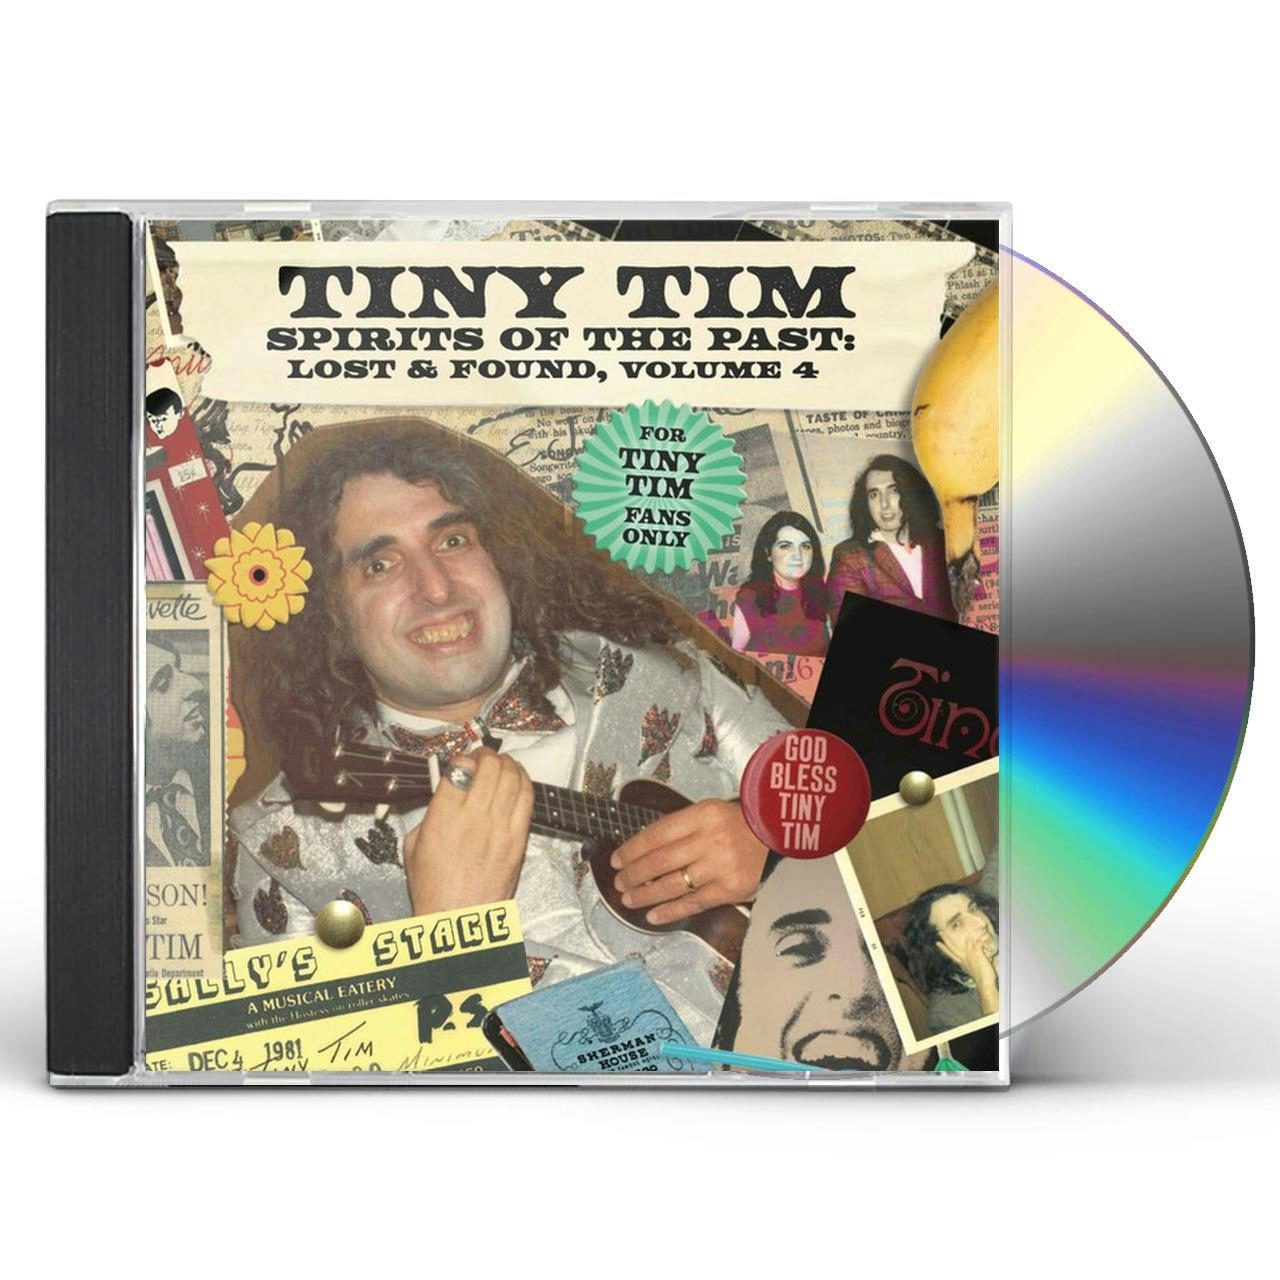 Tiny Tim SPIRITS OF THE PAST LOST & FOUND VOL. 4 CD